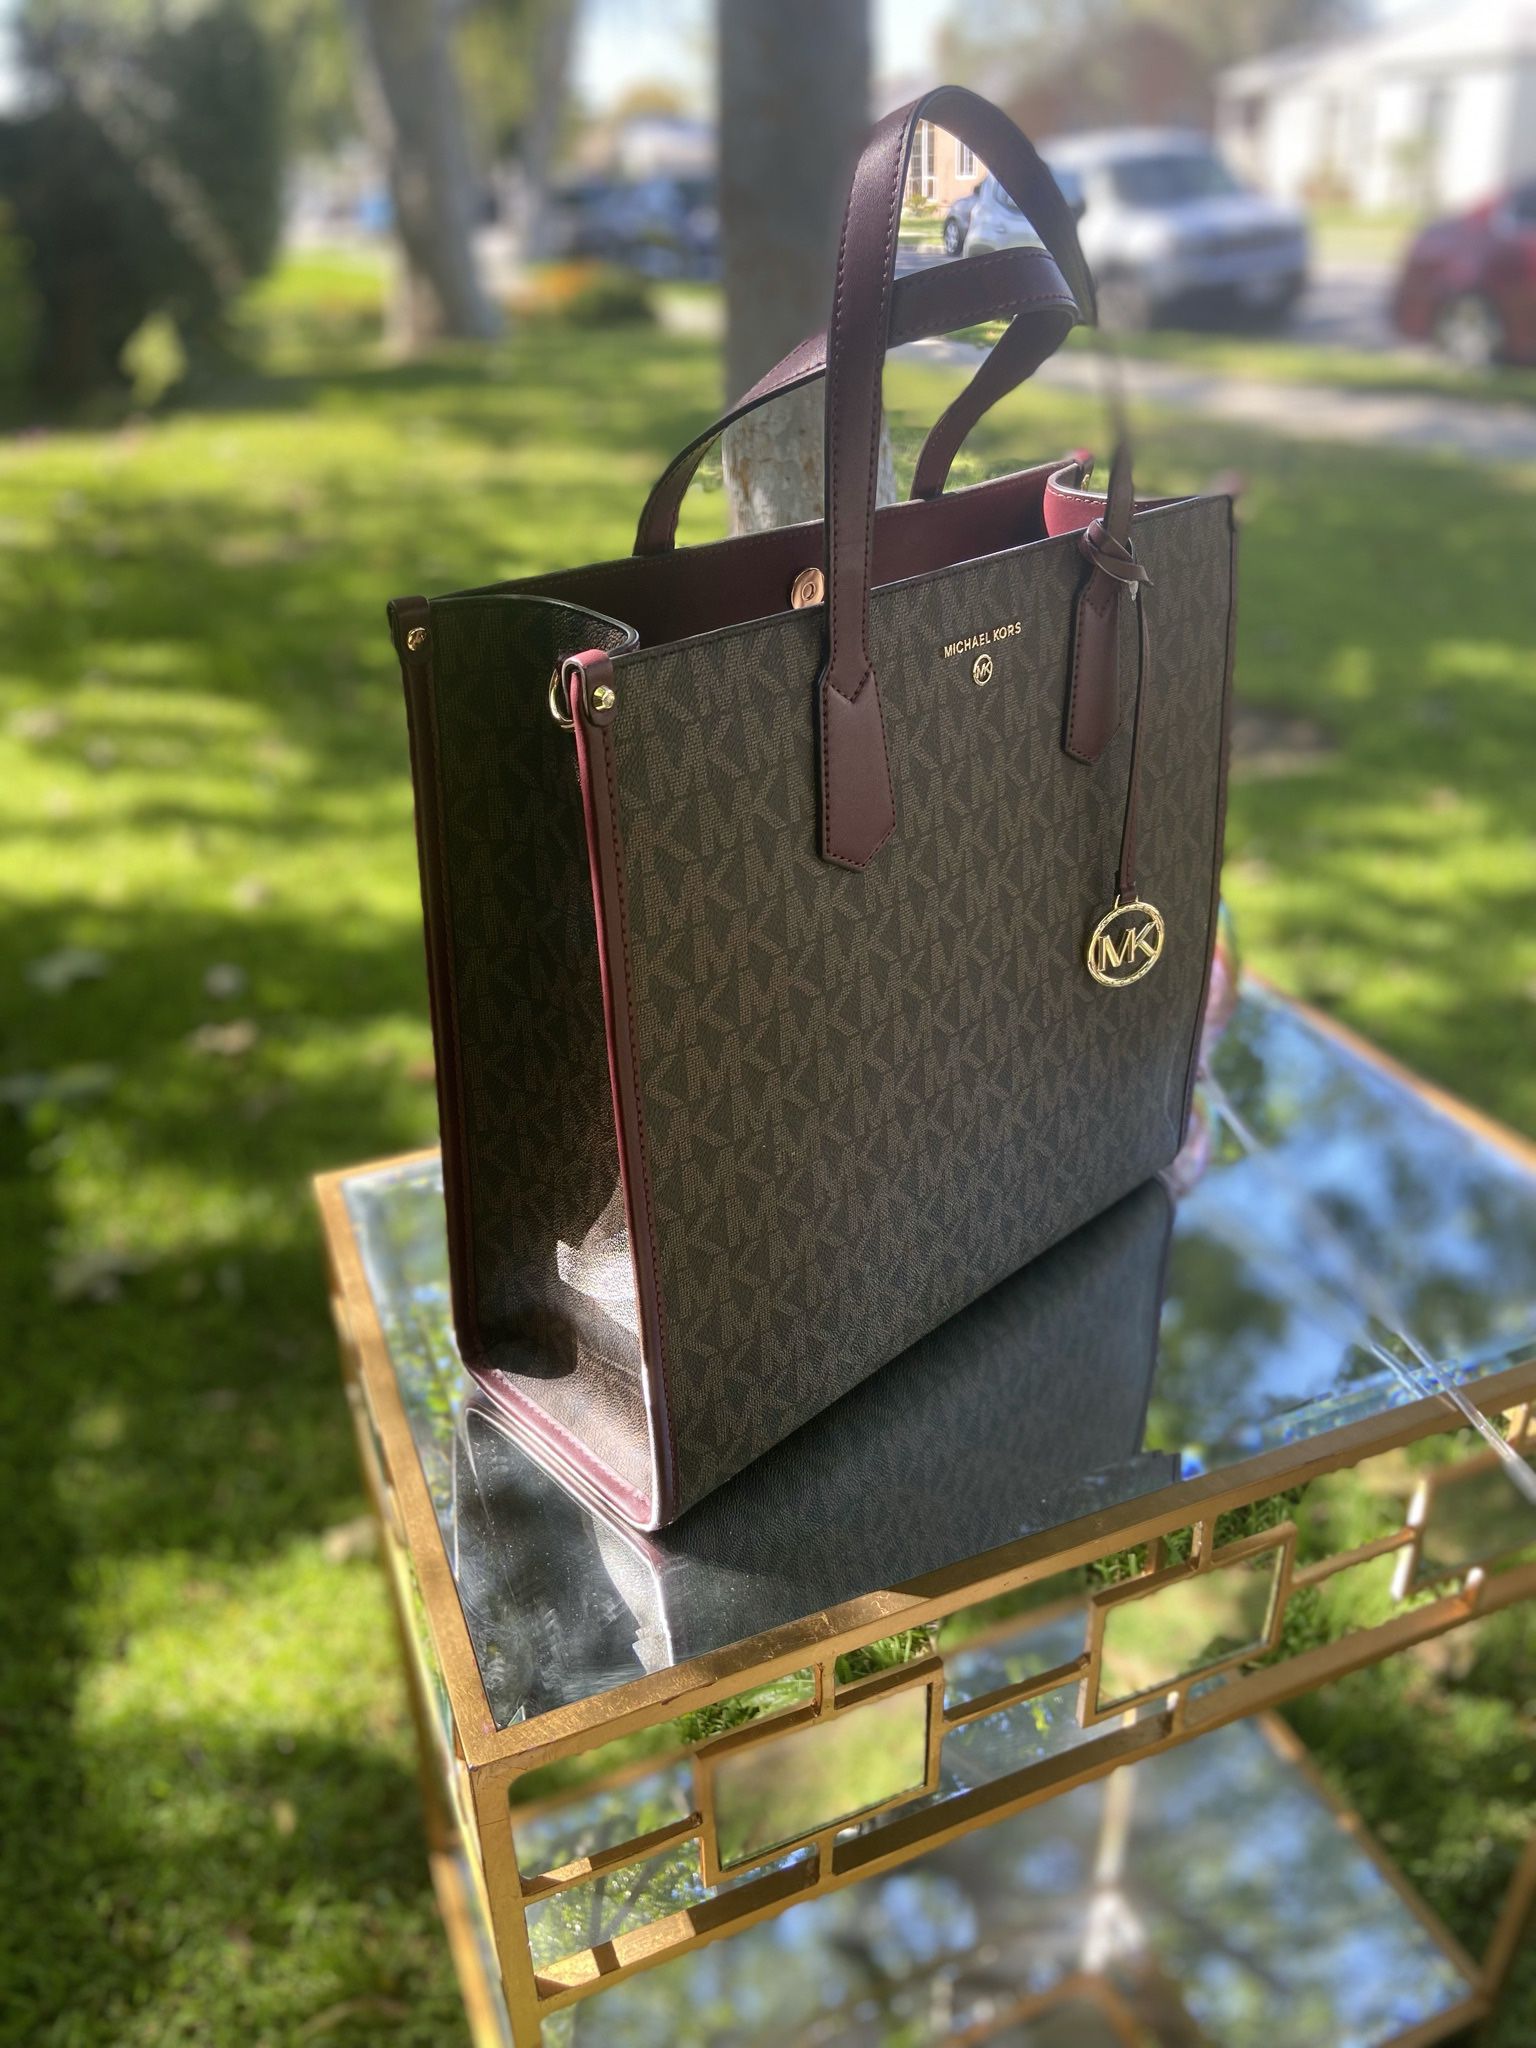 ️New Michael Kors Large Tote Bag for Sale in Long Beach, CA - OfferUp